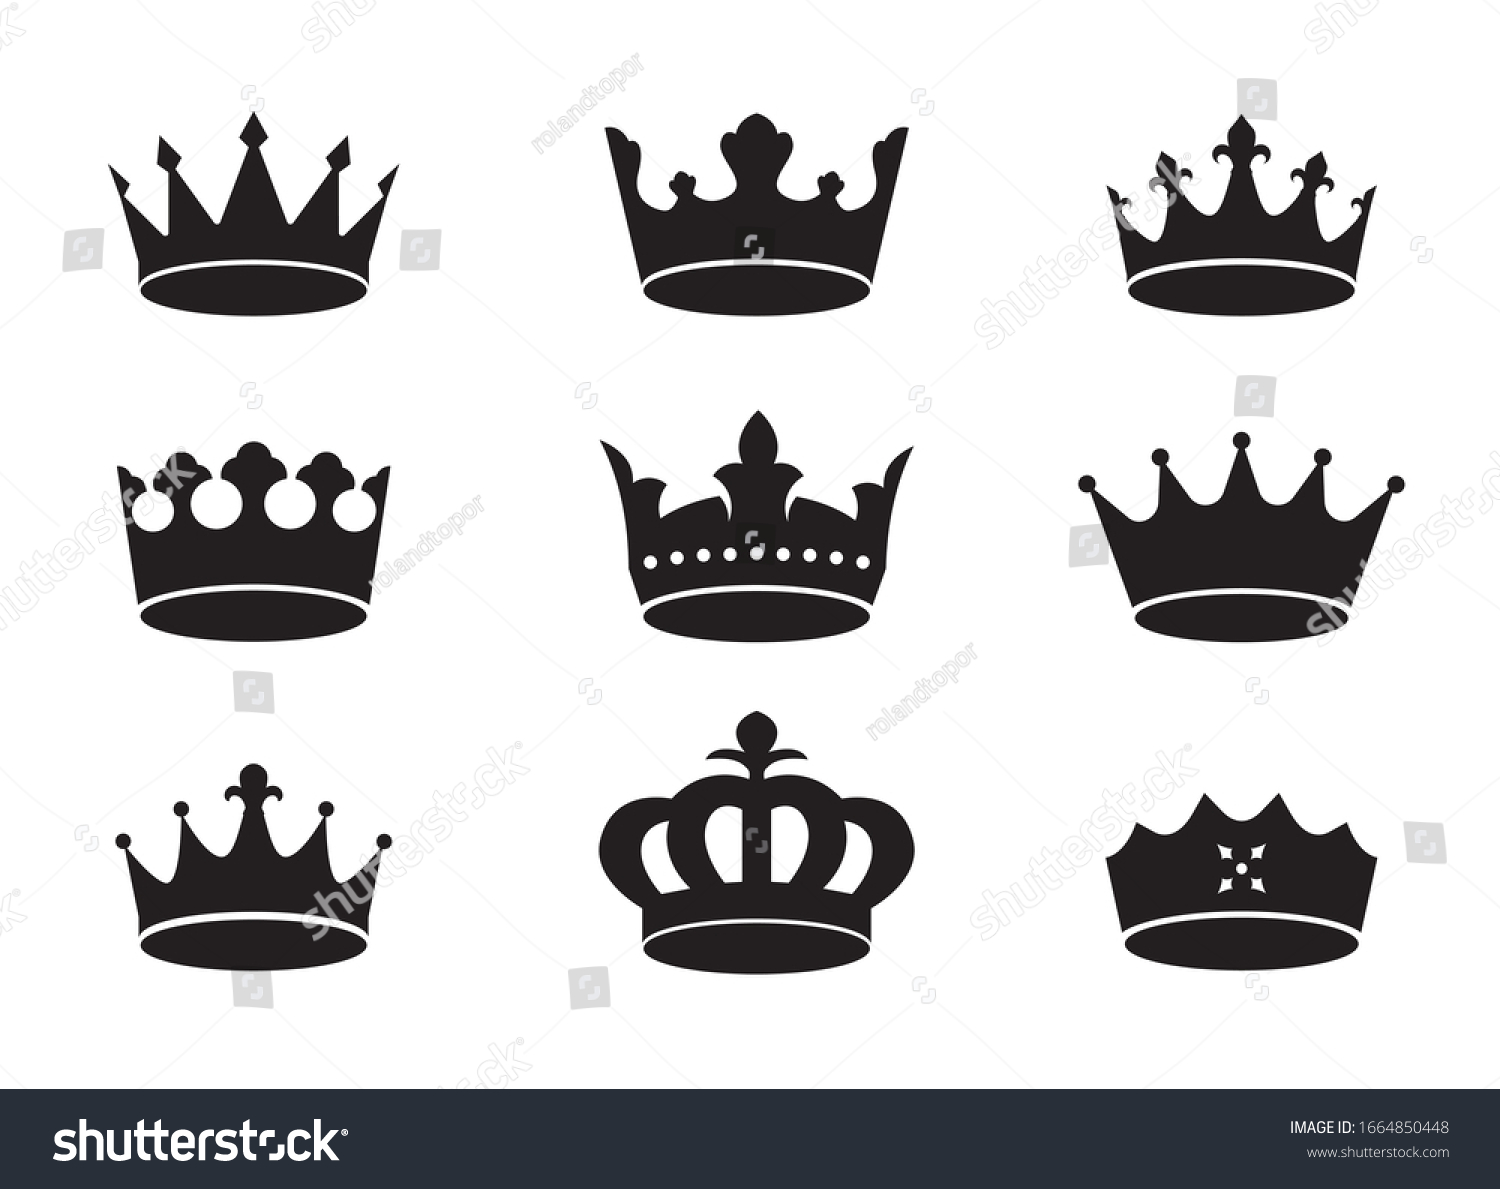 Set of black vector king crowns and icon on white background. Vector Illustration. Emblem and royal symbols. #1664850448